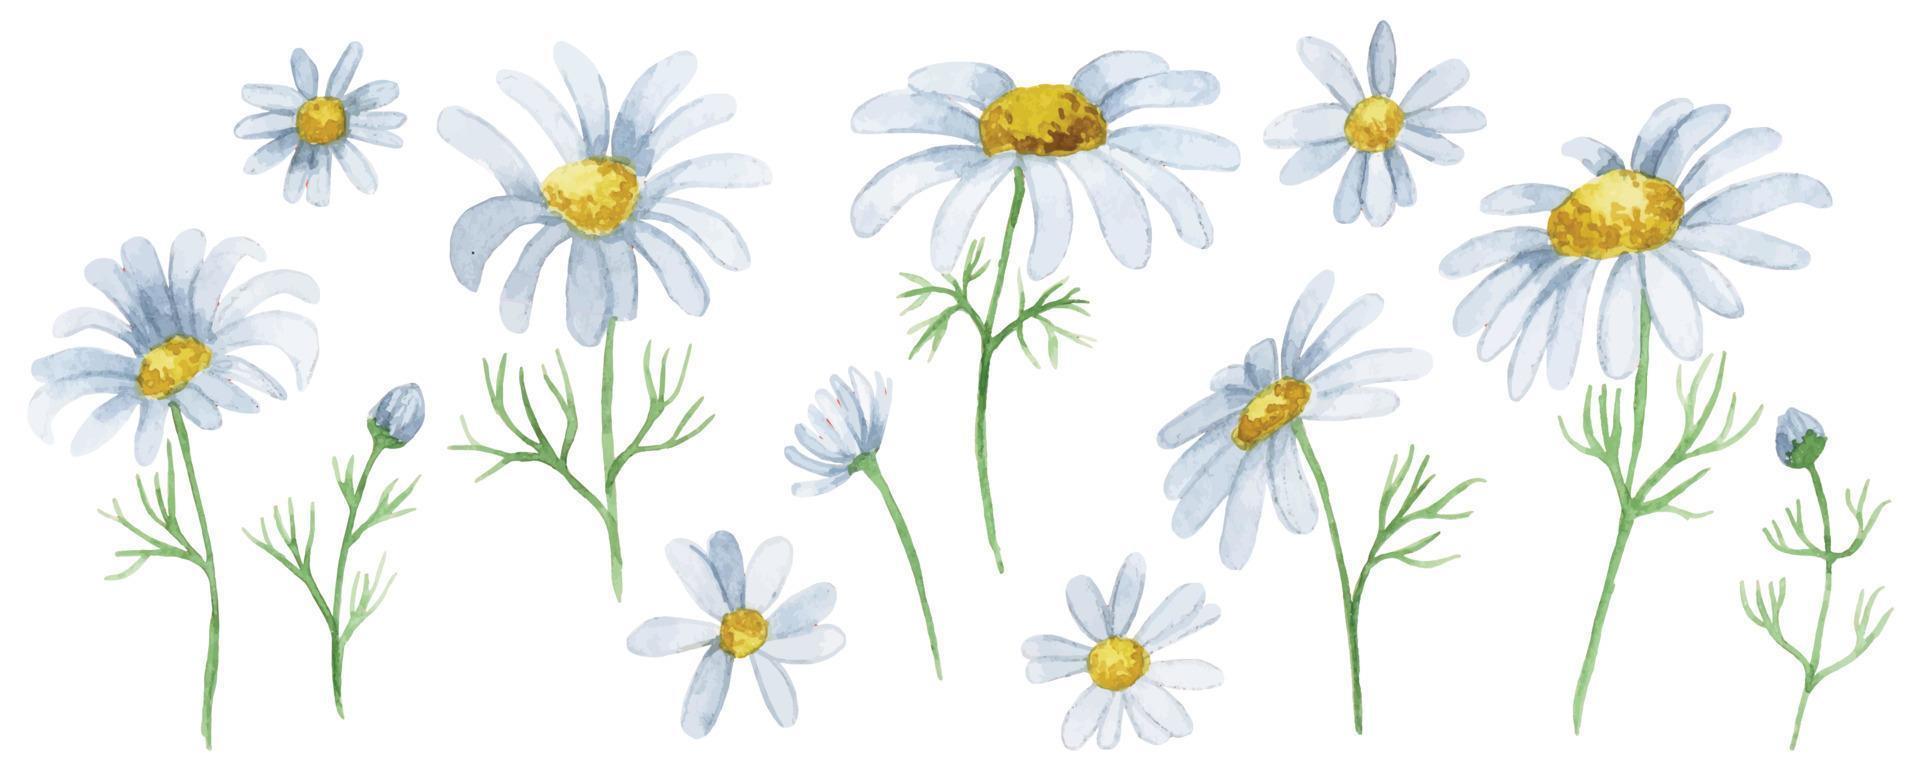 watercolor drawing set of chamomile flowers. wildflowers vector